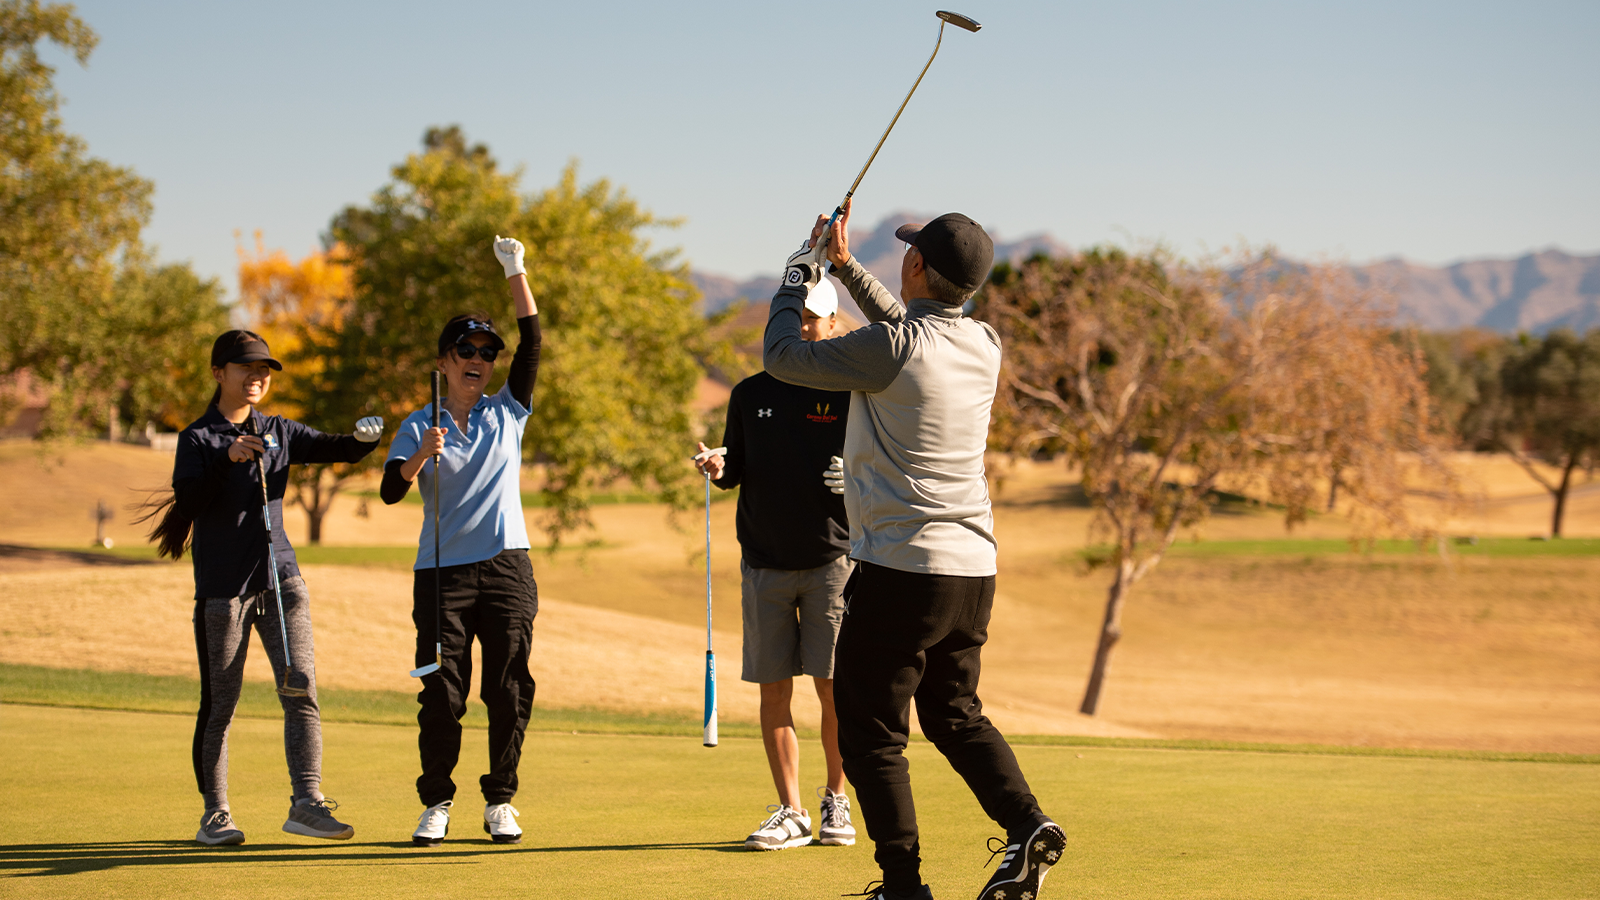 The Tokishi family celebrates Alan Tokishi's putt on the third hole during the 2020 PGA Family Cup at Augusta Ranch Golf Club on December 13, 2020 in Mesa, Arizona. (Photo by Traci Edwards/PGA of America)